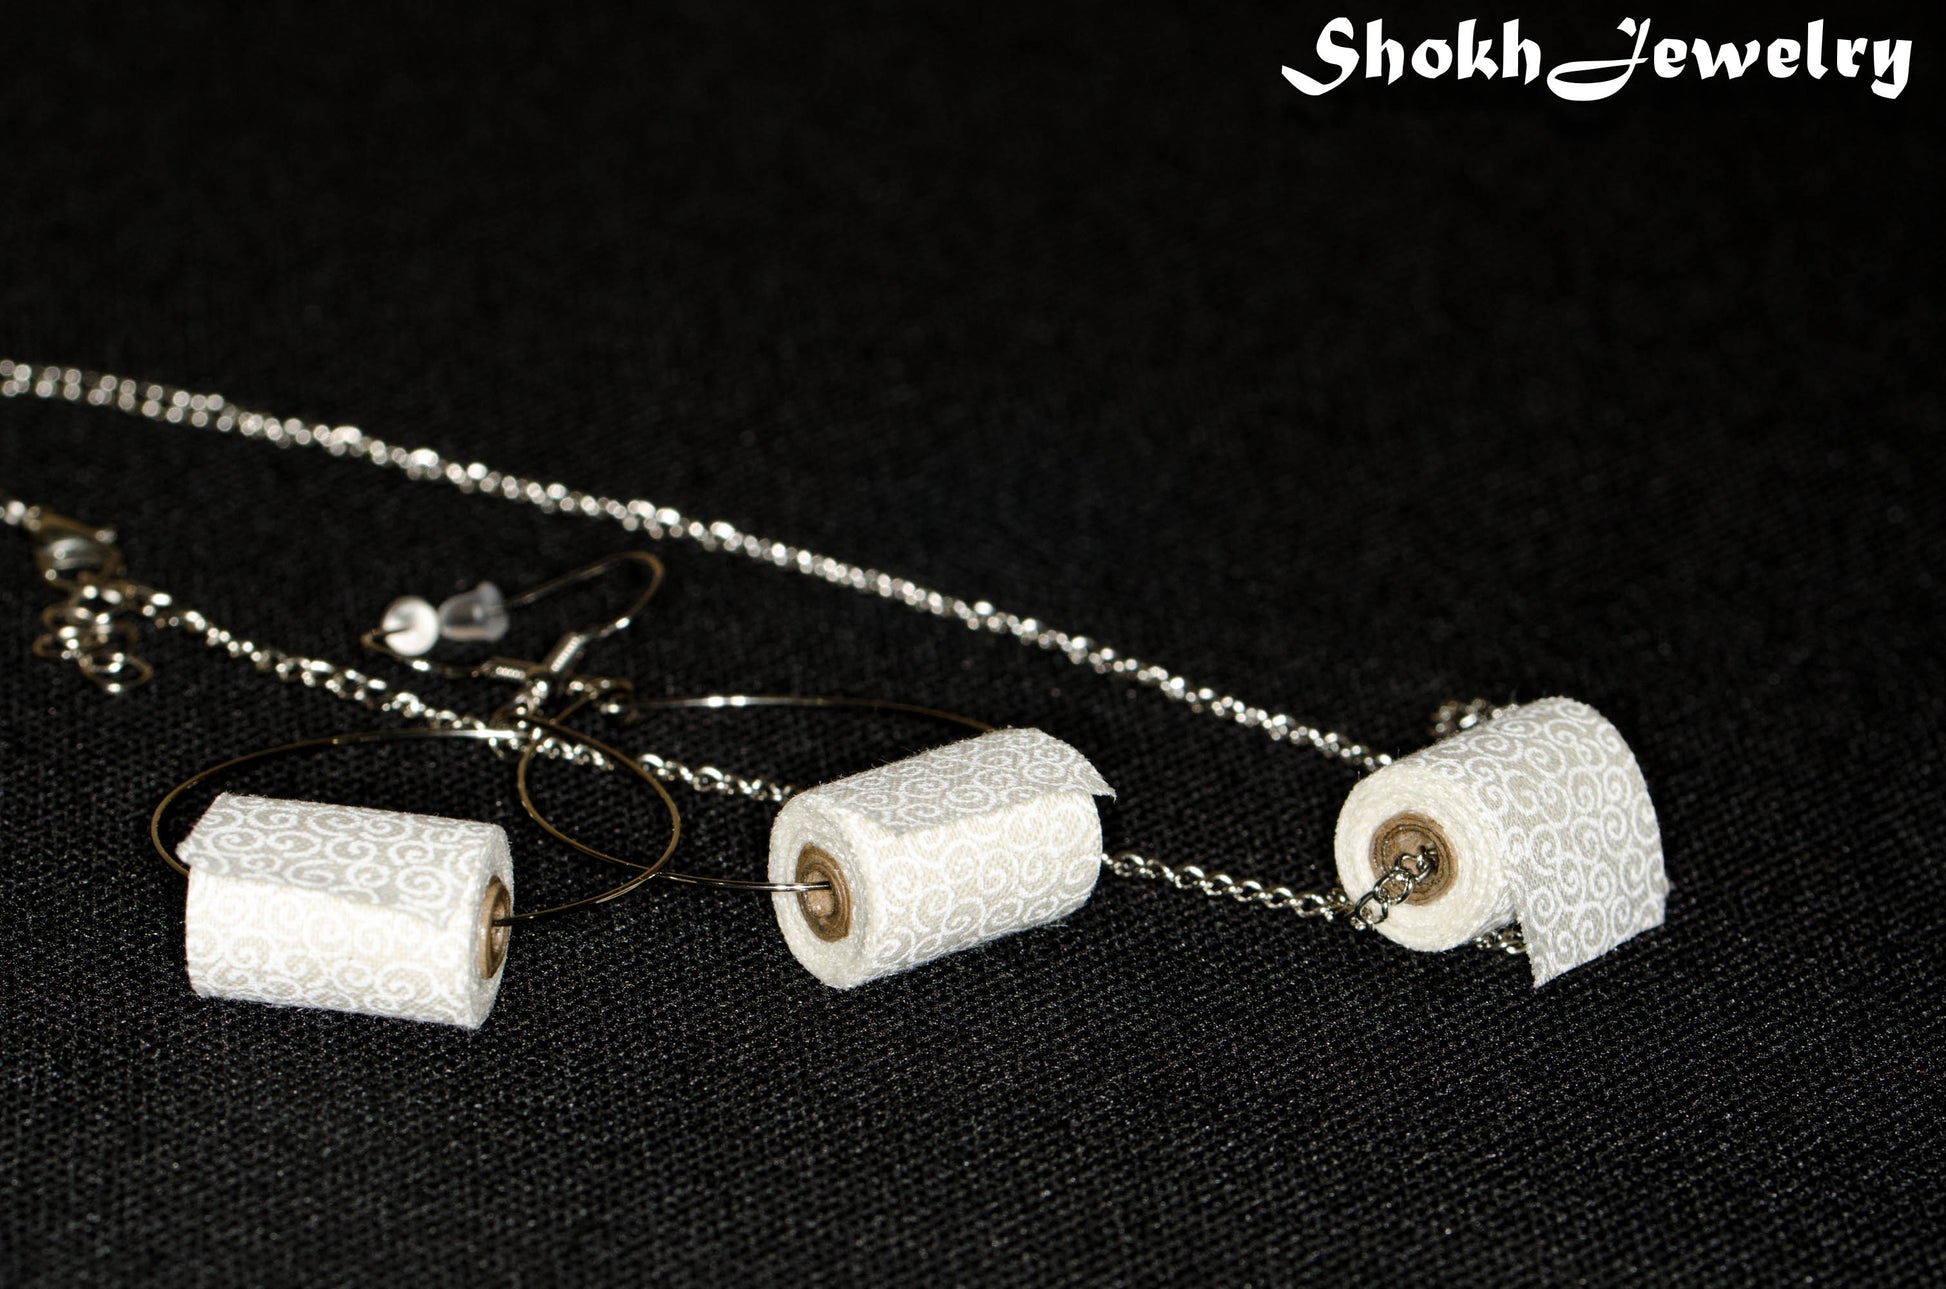 Close up of Miniature Toilet Paper Roll Necklace and Earrings Set.